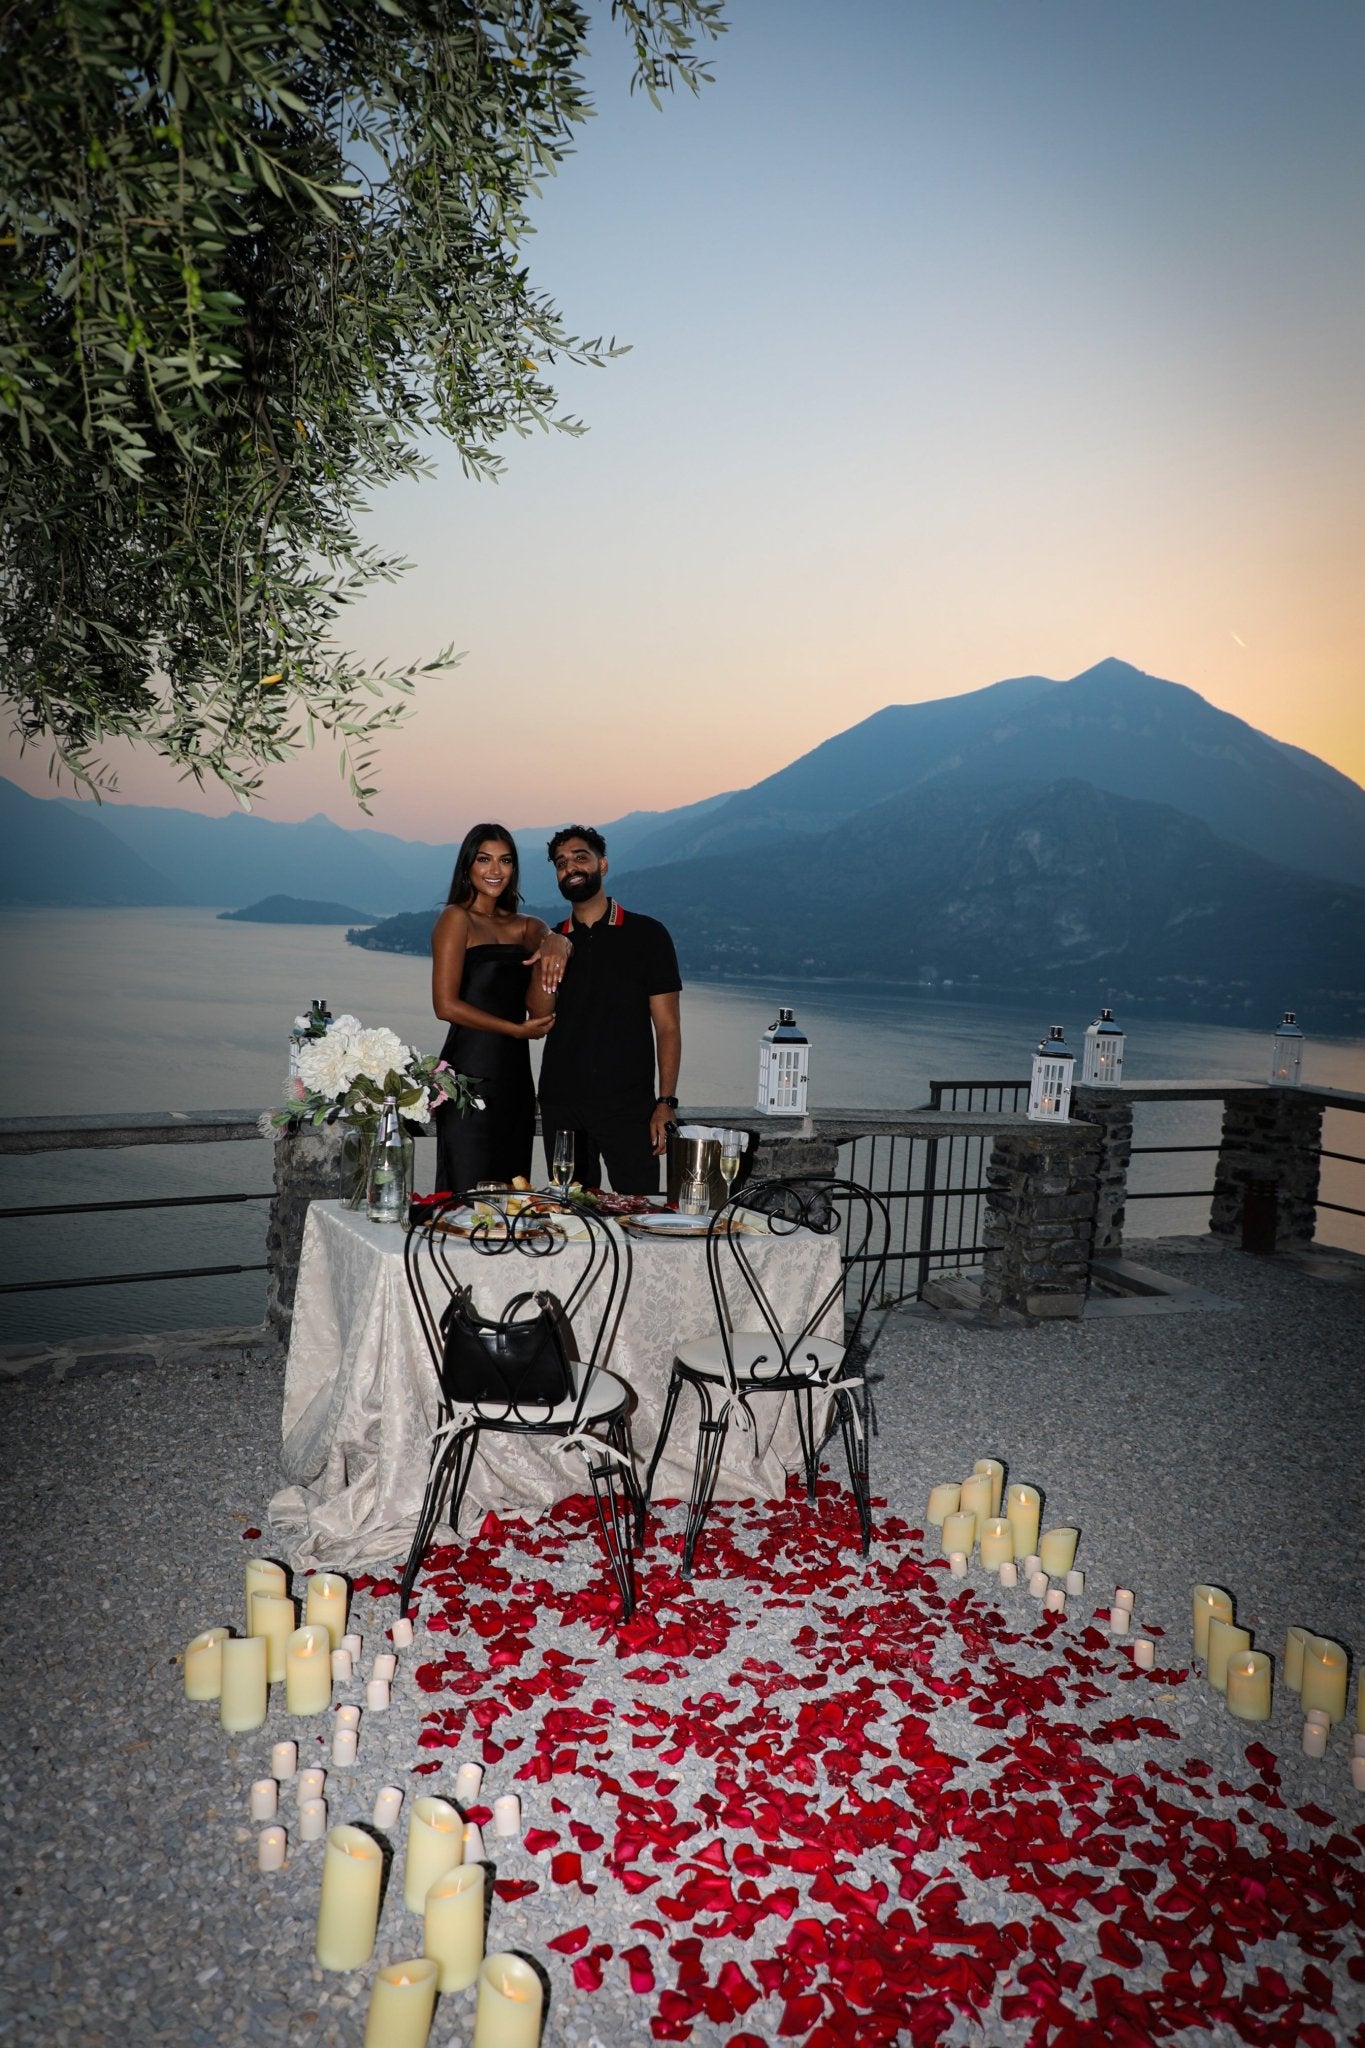 Proposal Photo Shoot at Castello di Vezio with Flowers, Food and Music